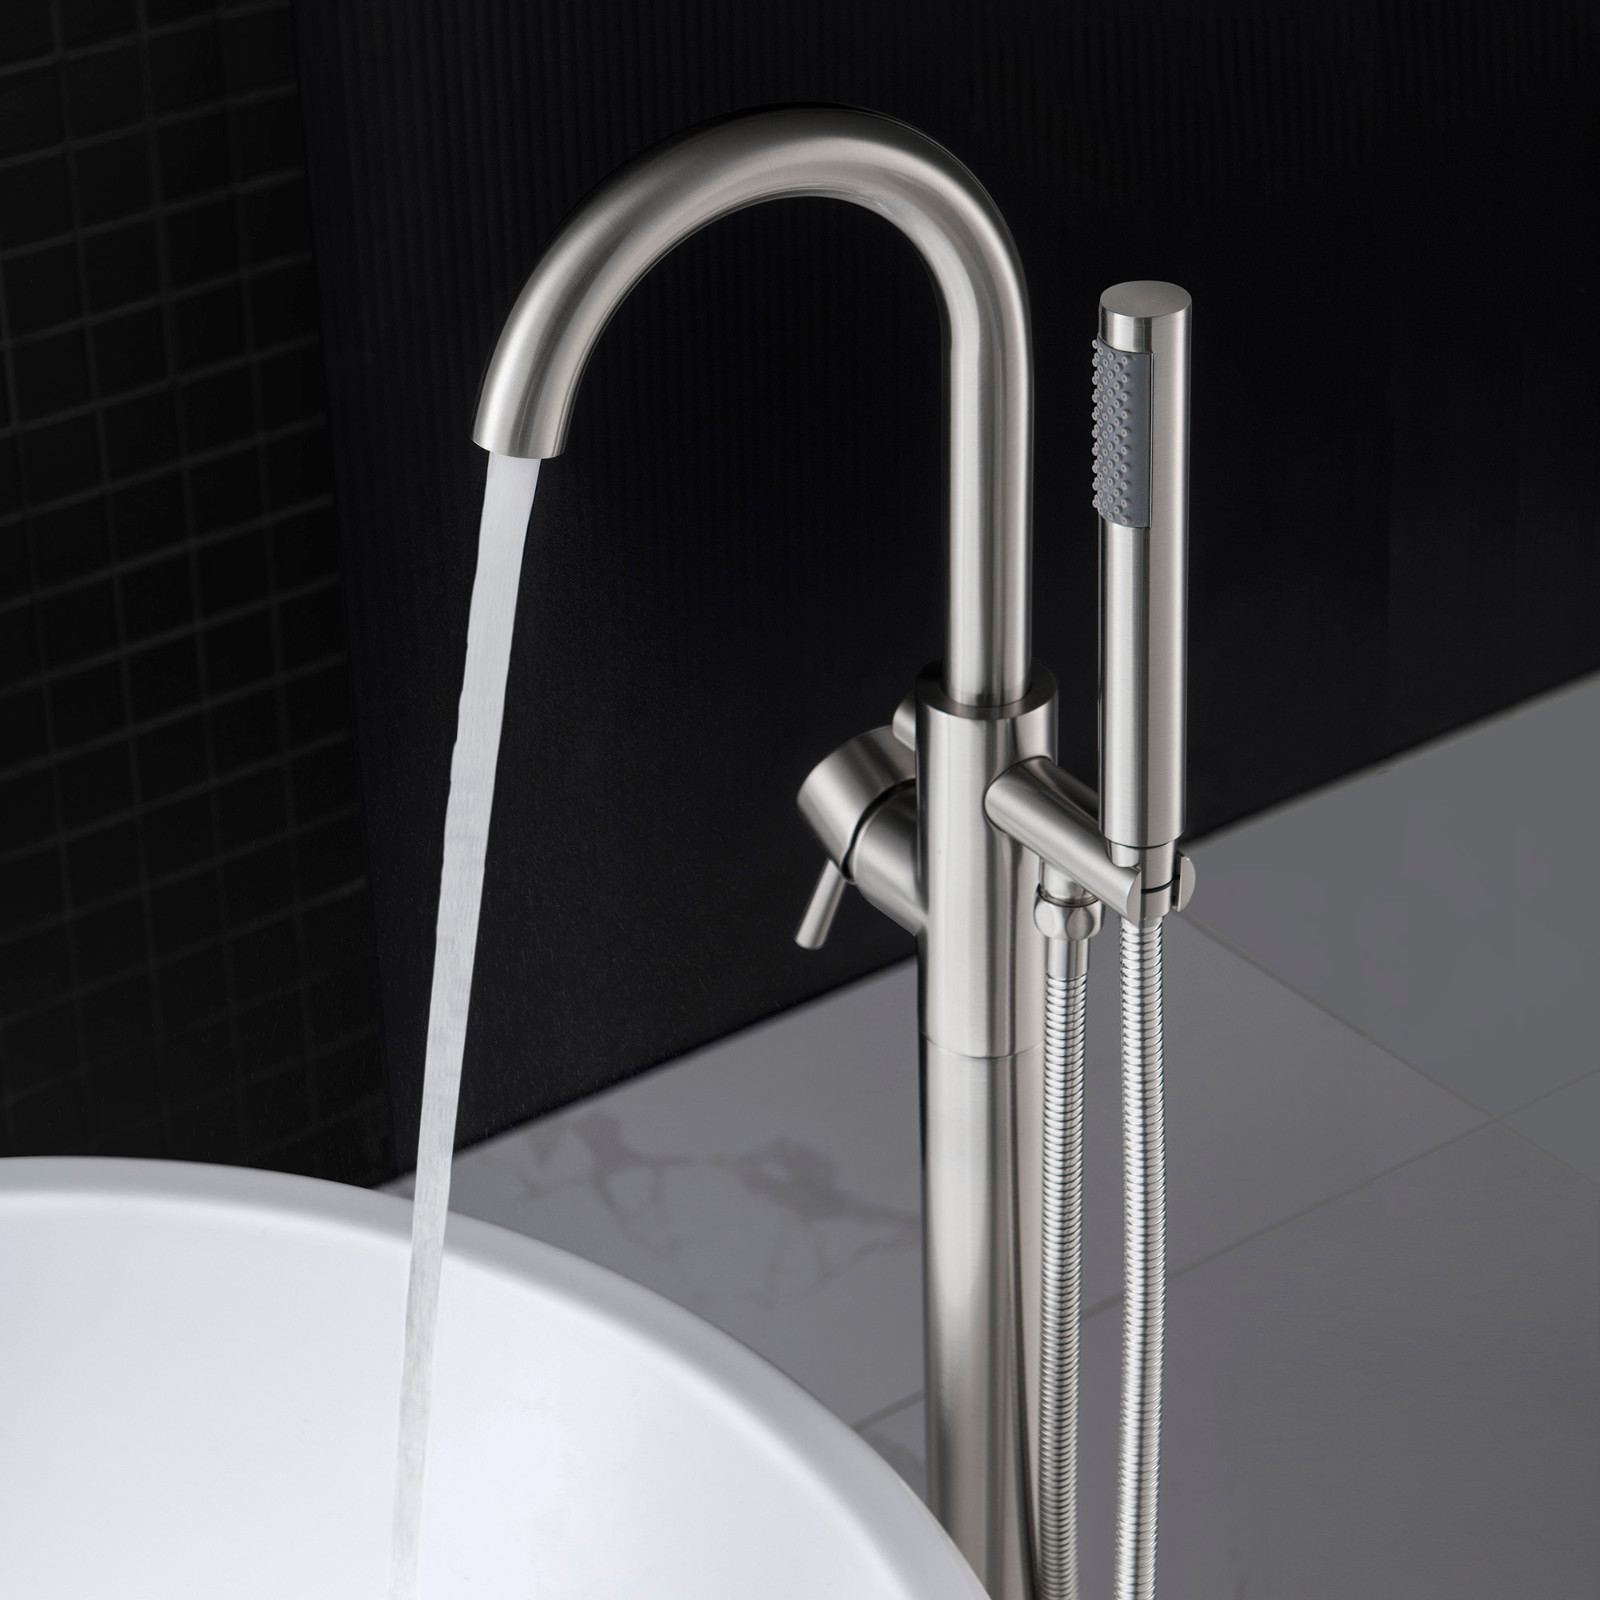  WOODBRIDGE F0001BNRD Contemporary Single Handle Floor Mount Freestanding Tub Filler Faucet with Hand shower in Brushed Nickel Finish._11094